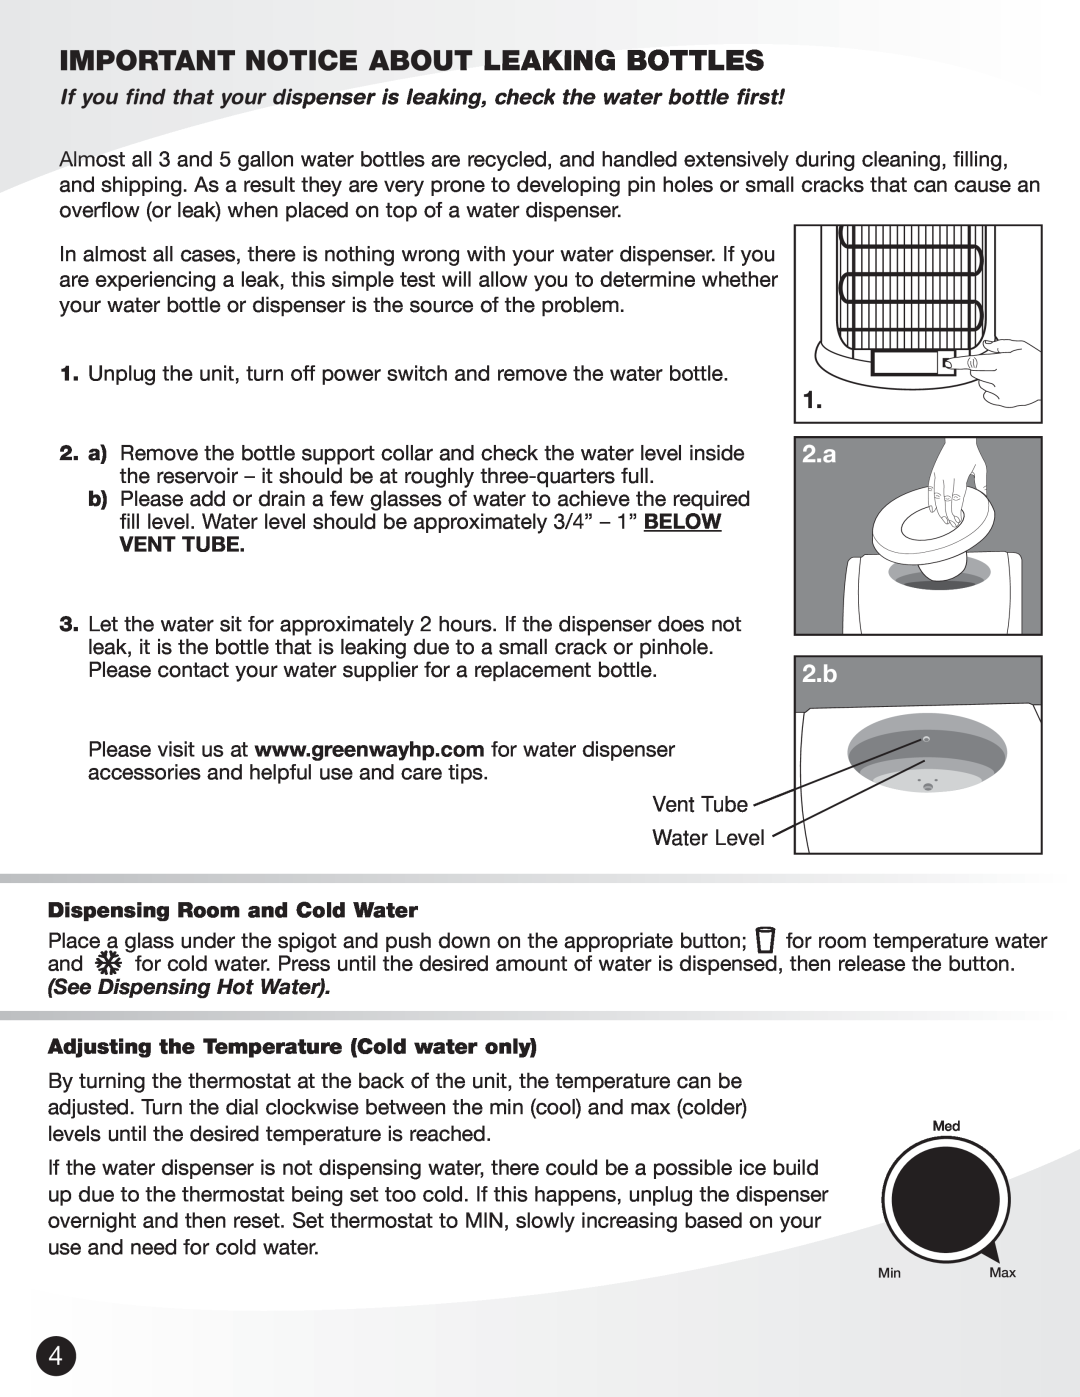 Greenway Home Products GWD5960W Important Notice About Leaking Bottles, Vent Tube, Dispensing Room and Cold Water 